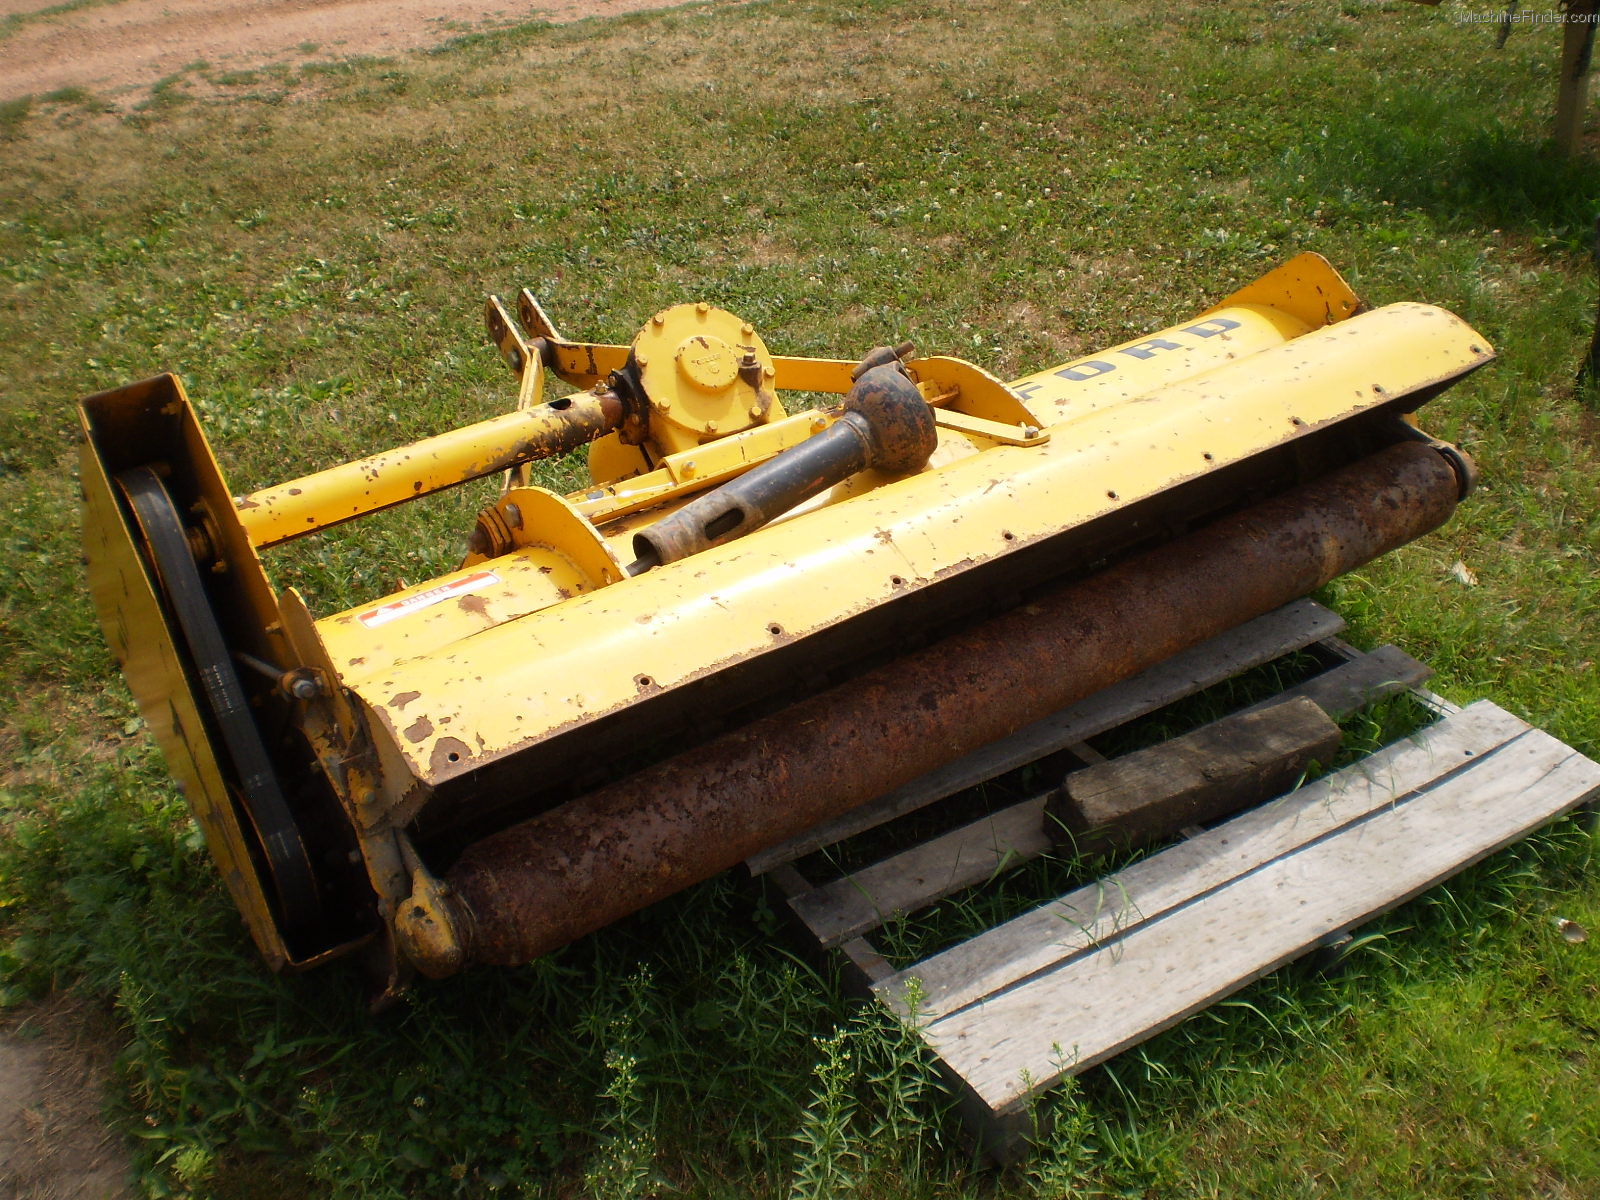 John deere flail mower is old ford #6